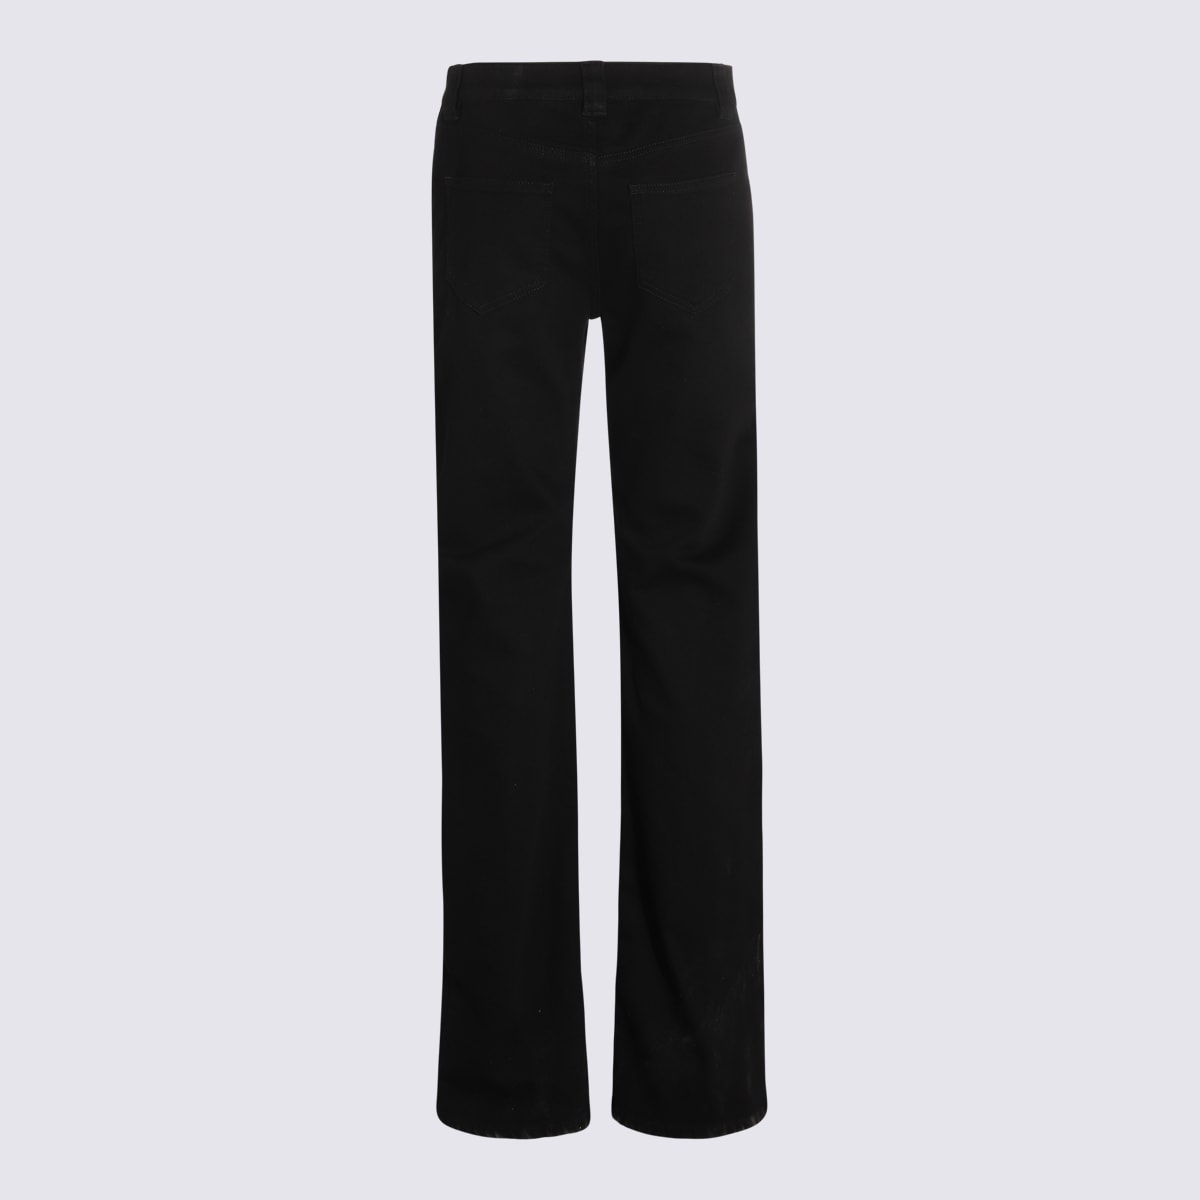 Tom Ford Black Cotton Trousers